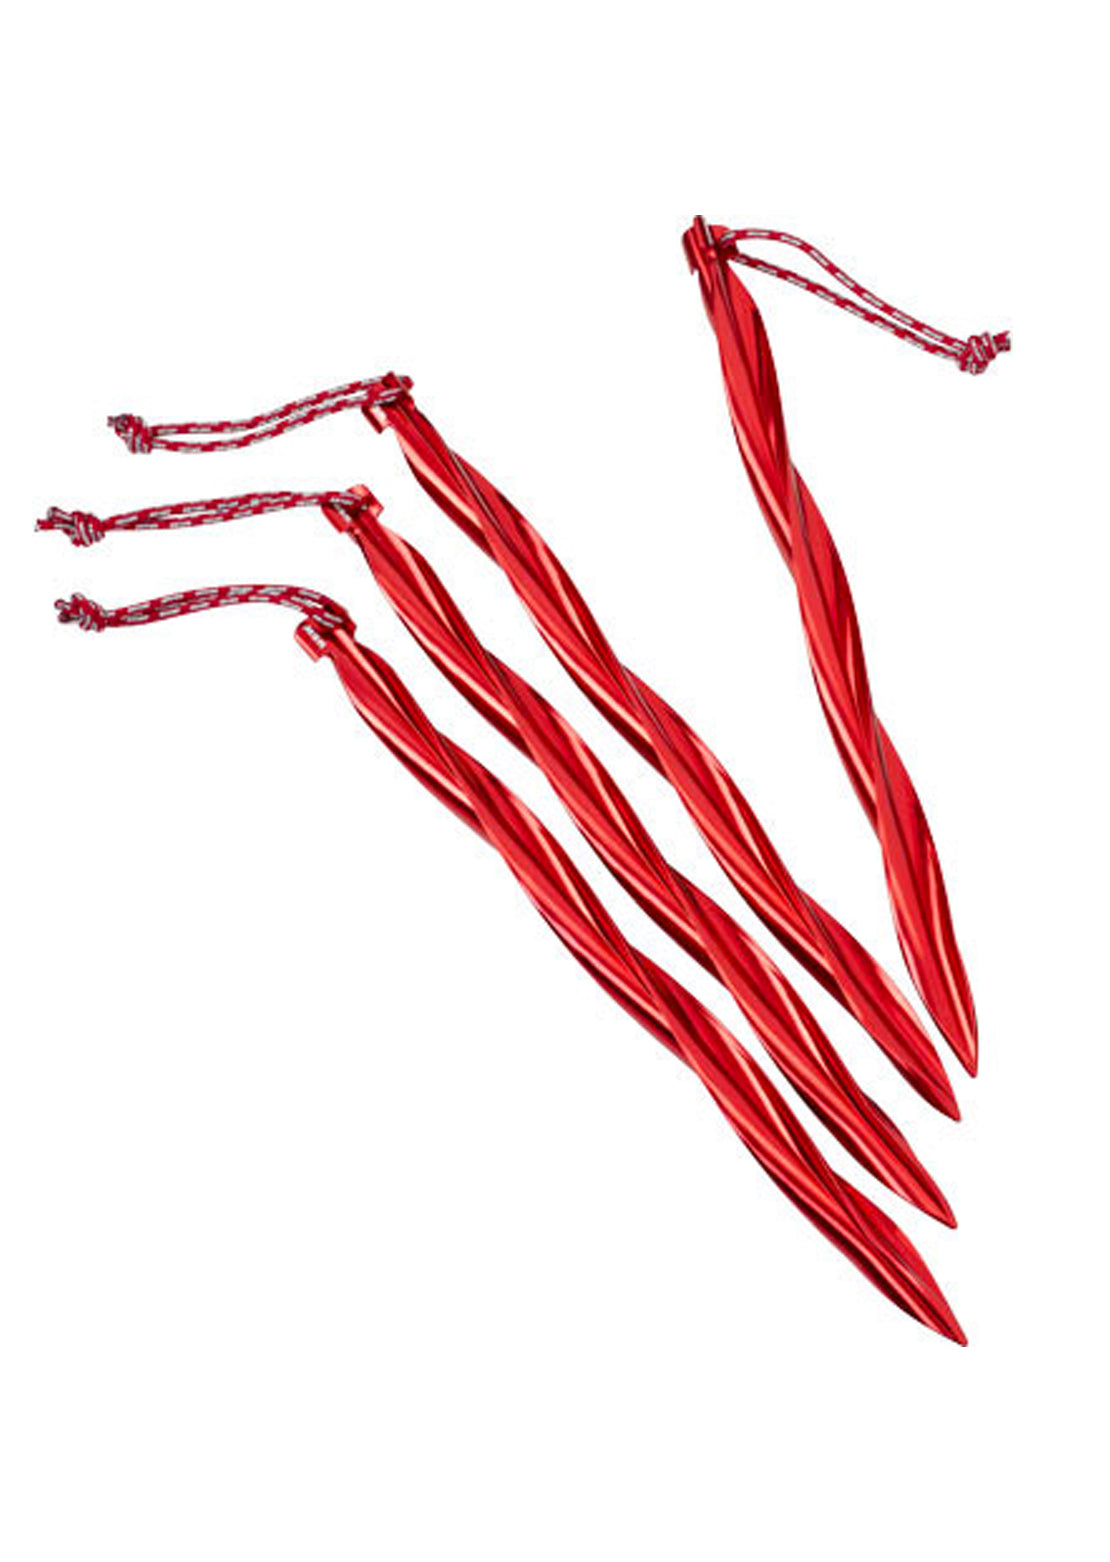 MSR Cyclone Stakes Kit V2 Red